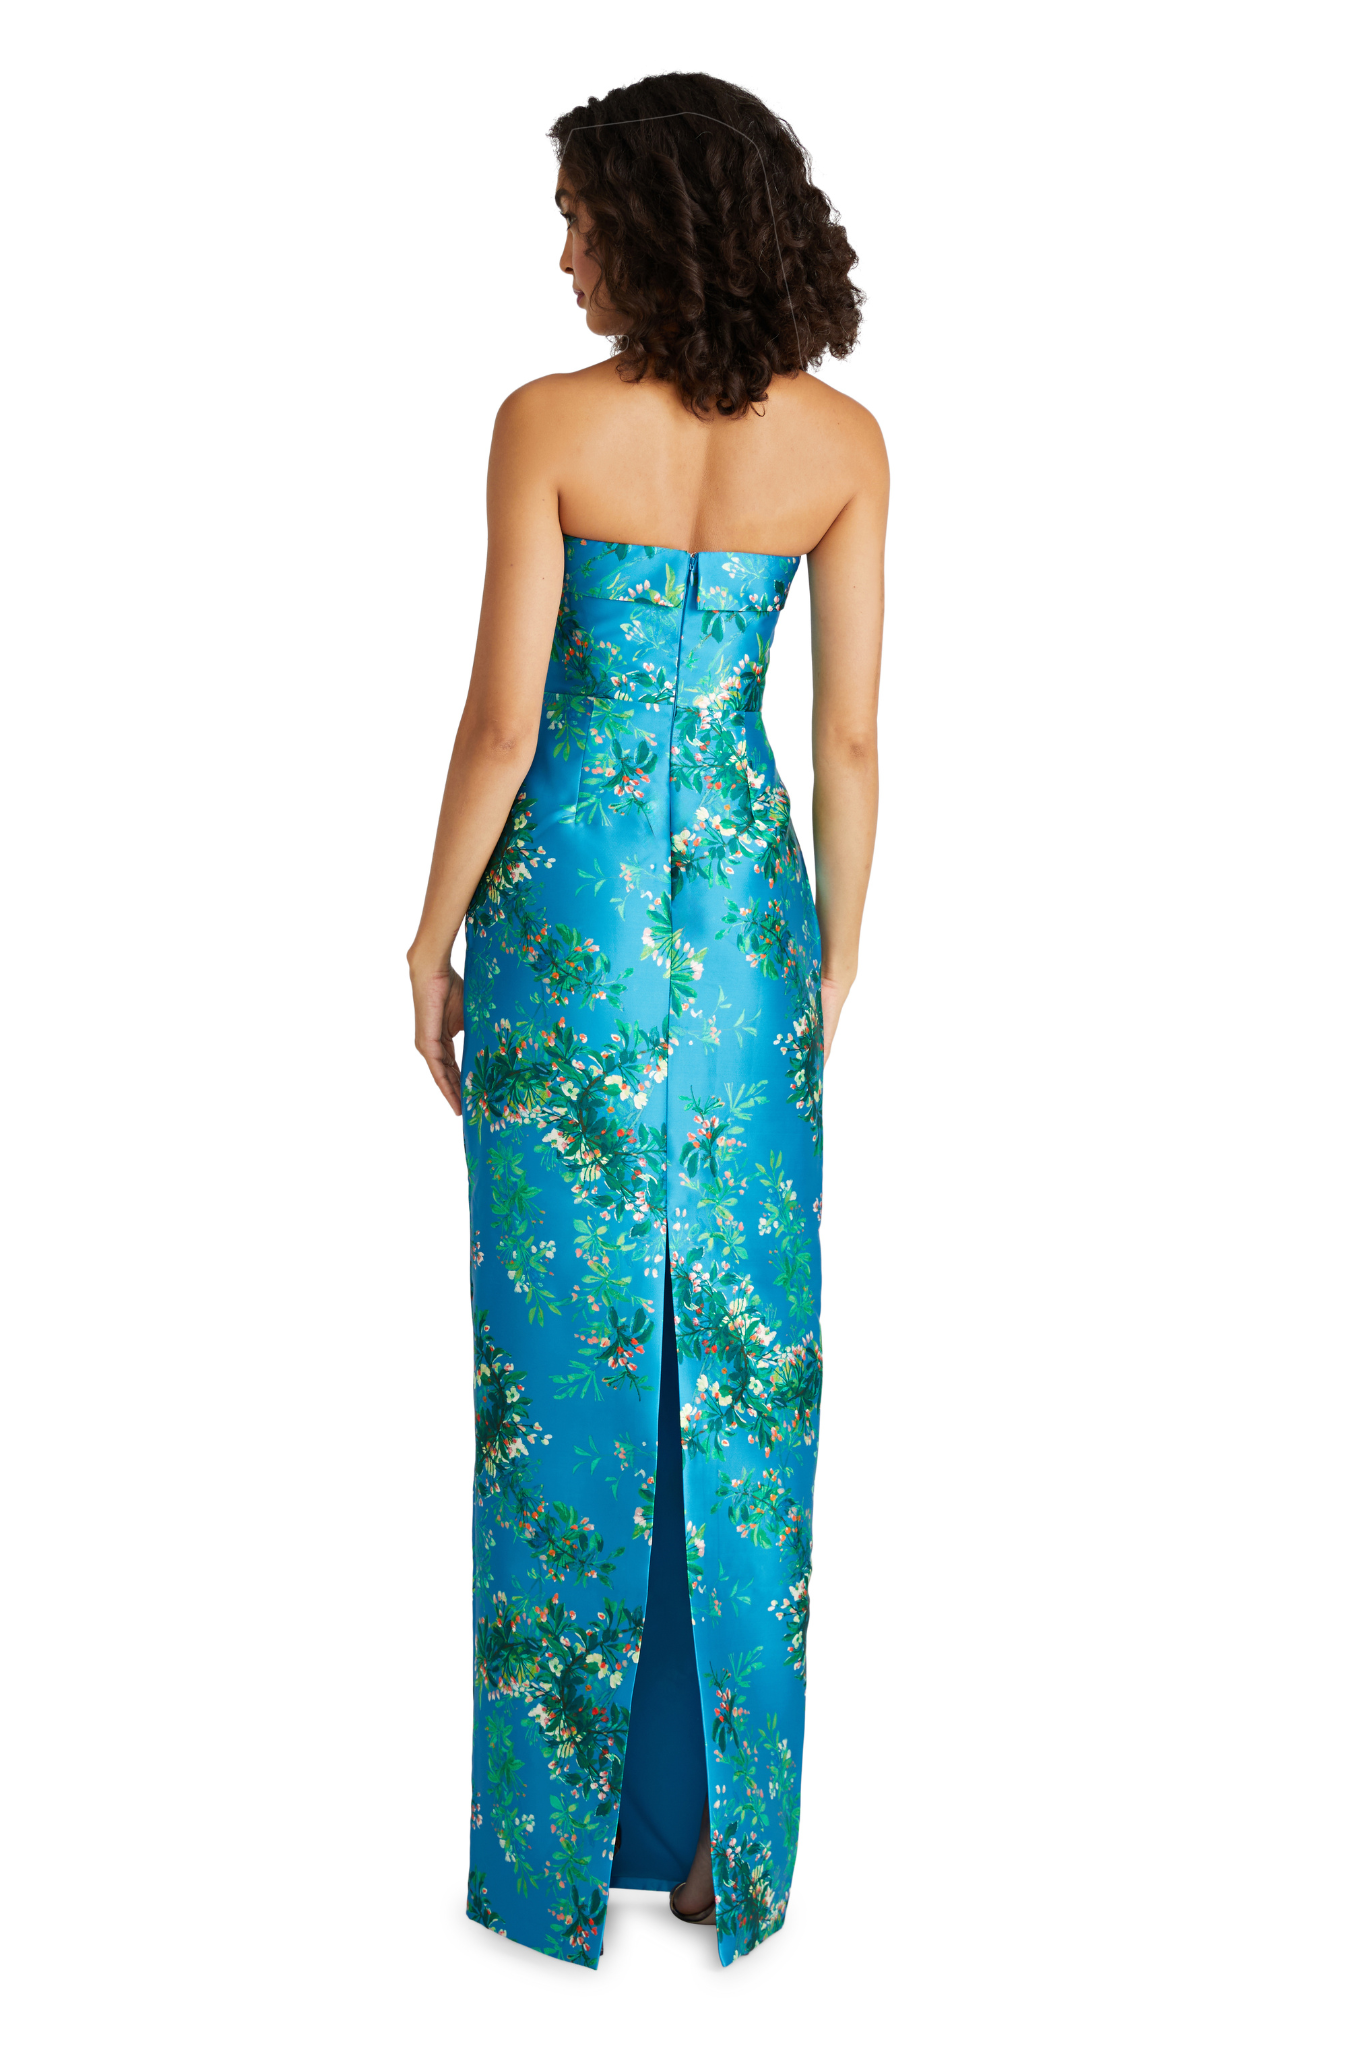 Cleo Strapless Column Gown by Theia Couture - RENTAL